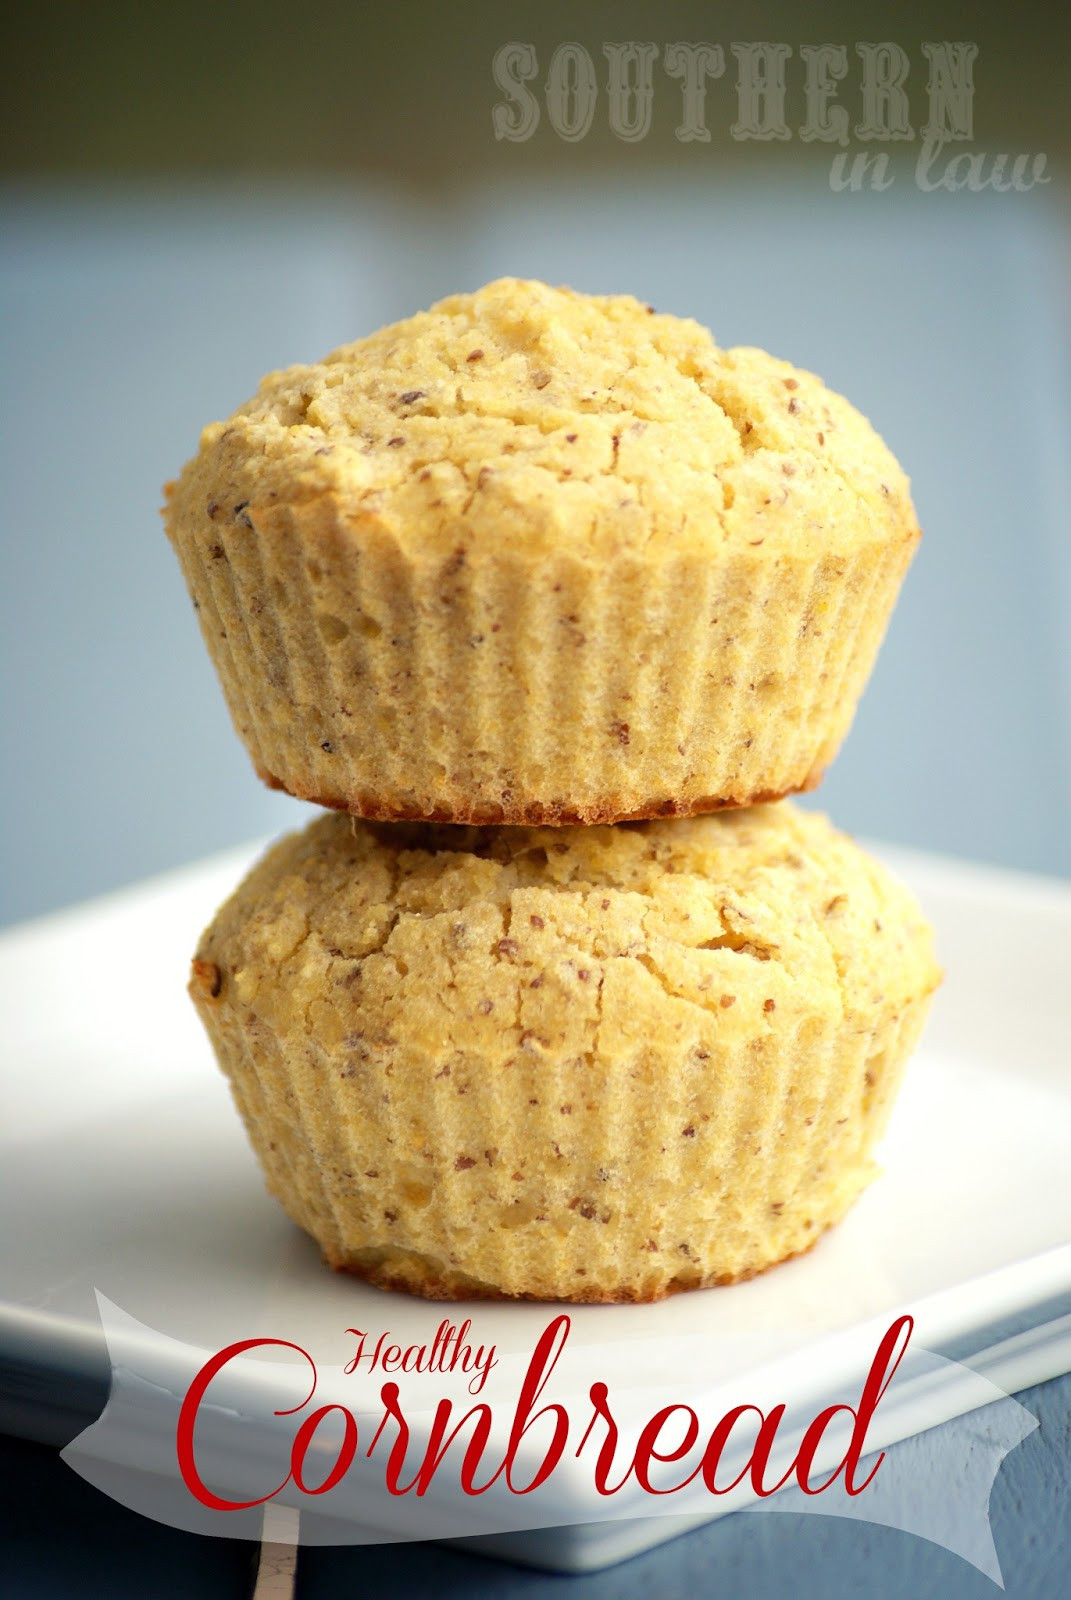 Healthy Cornbread Muffins the 20 Best Ideas for southern In Law Recipe Healthy Cornbread Muffins